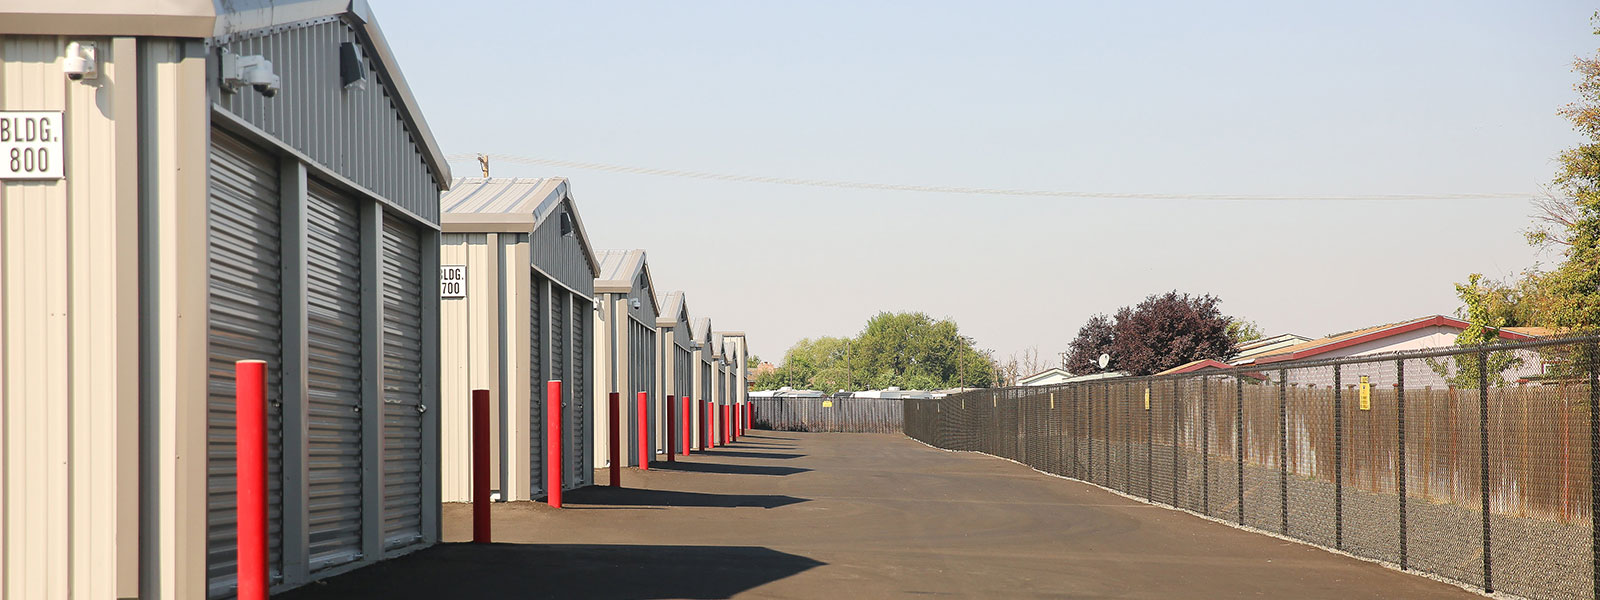 Outside view of storage buildings with White borders